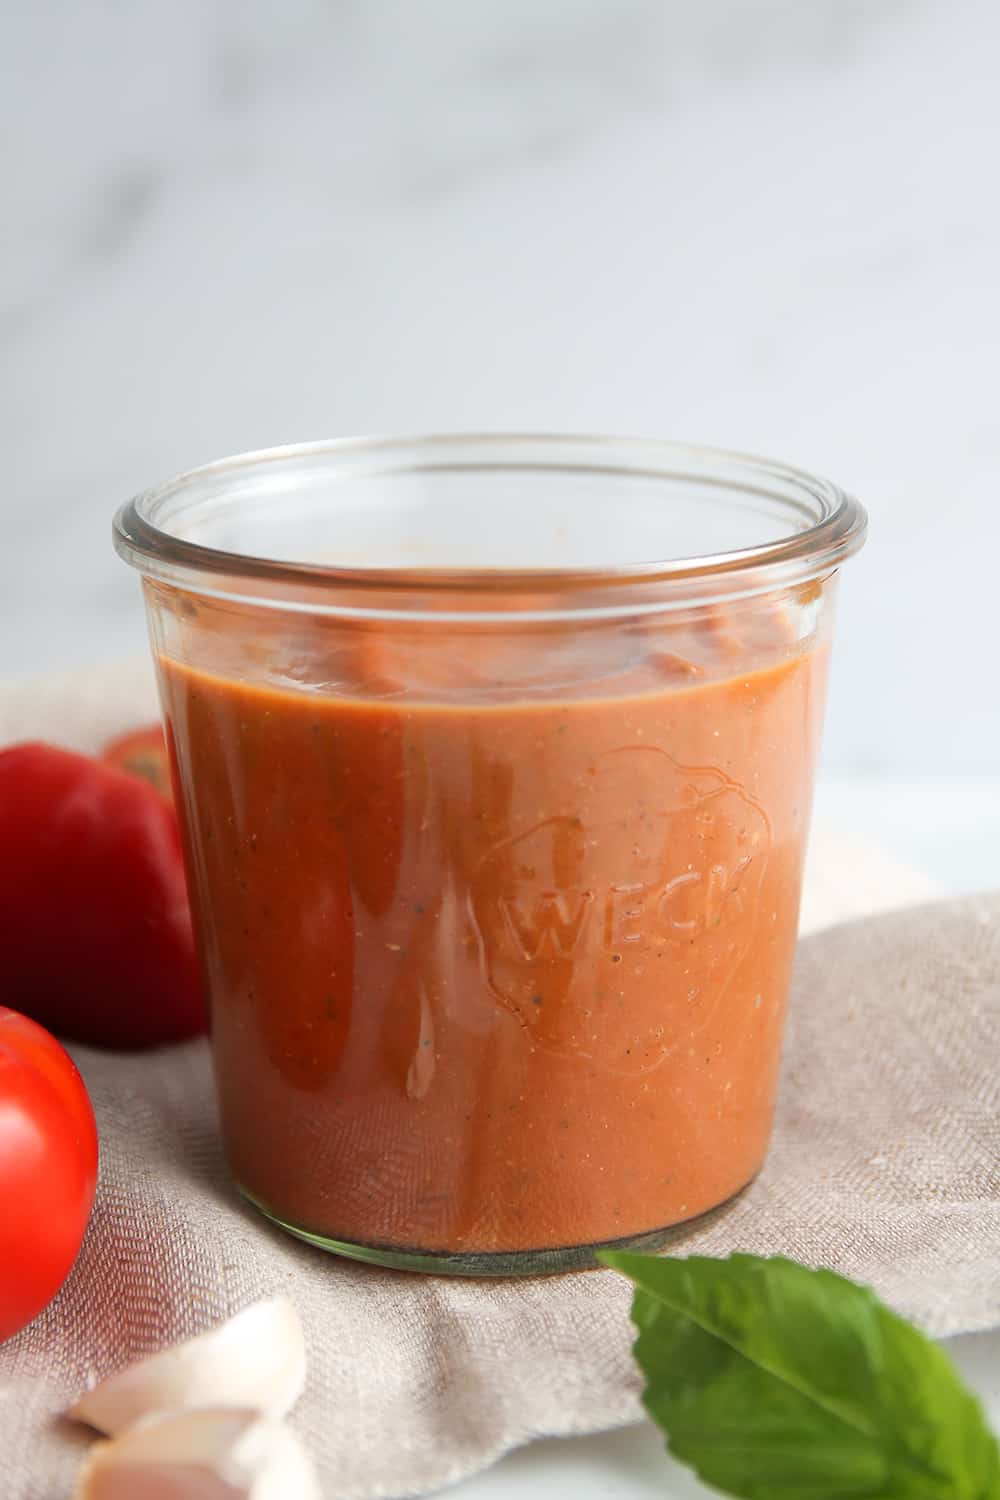 Homemade tomato sauce in a jar, with fresh tomatoes and herbs